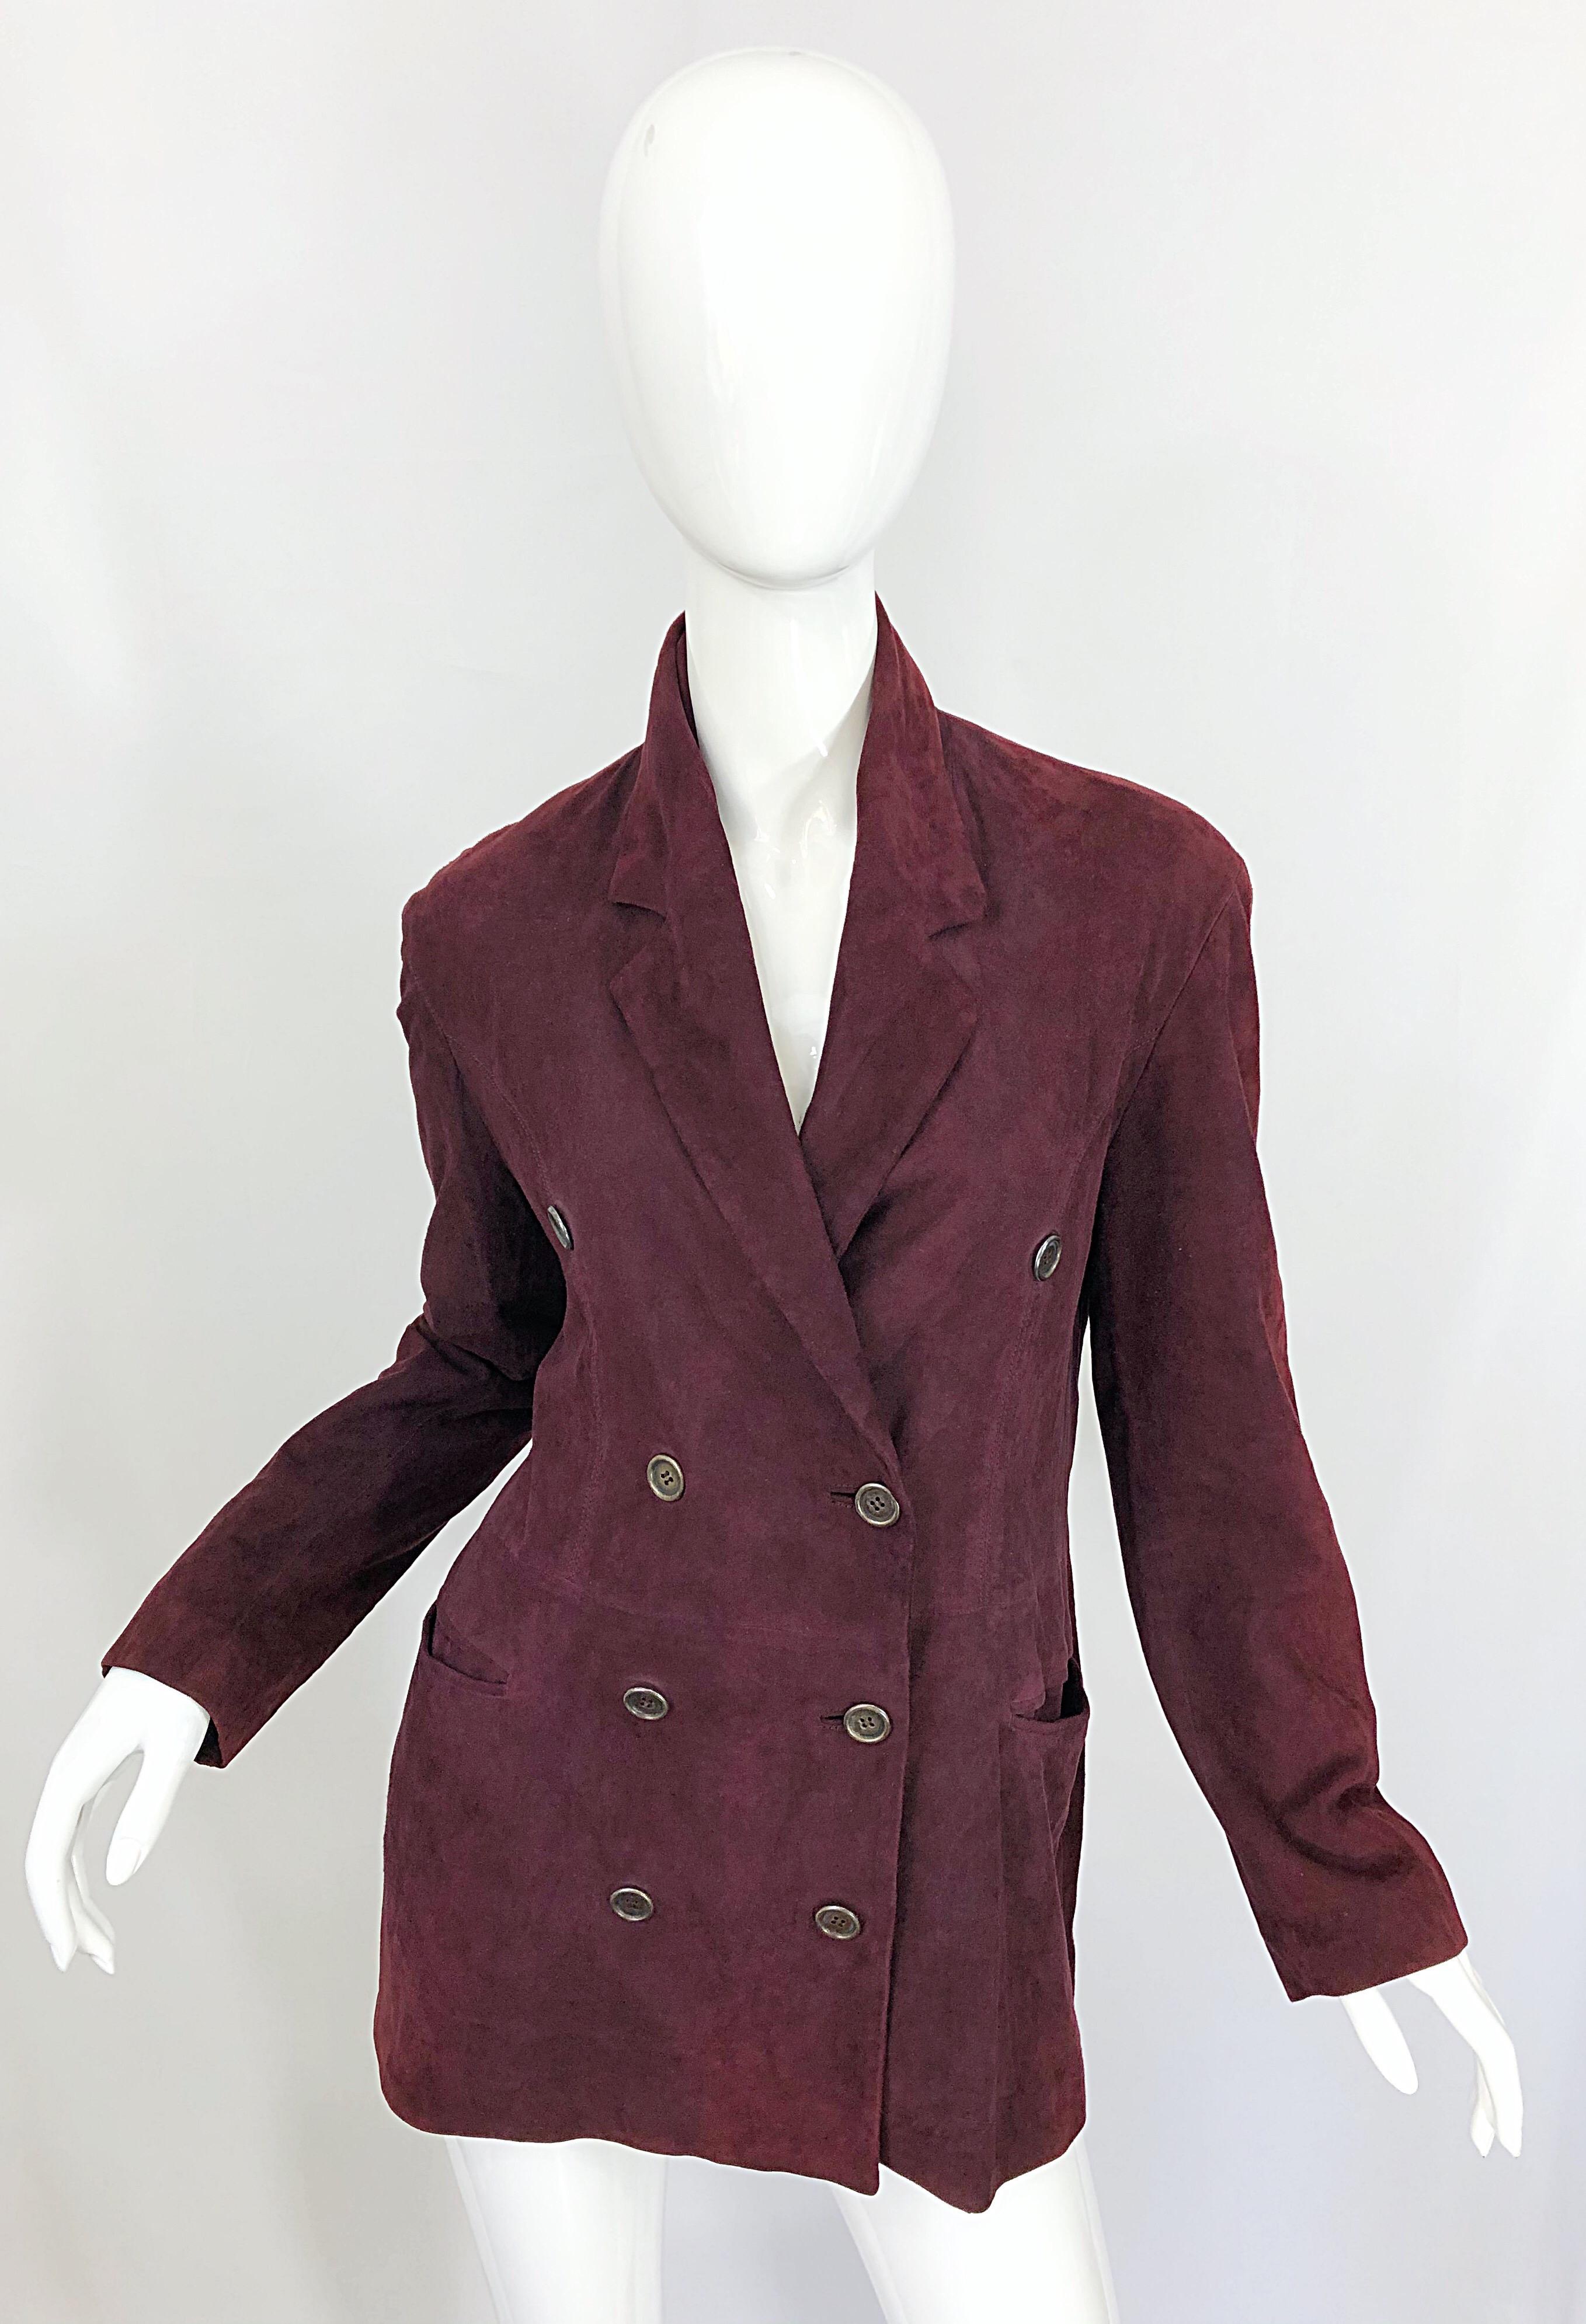 Chic vintage 90s RIFAT OZBEK maroon / burgundy suede leather double breasted blazer jacket! Features pewter buttons, and clear interior buttons to keep everything in place. Pockets at each side of the waist. Yellow embroidered logo directly under